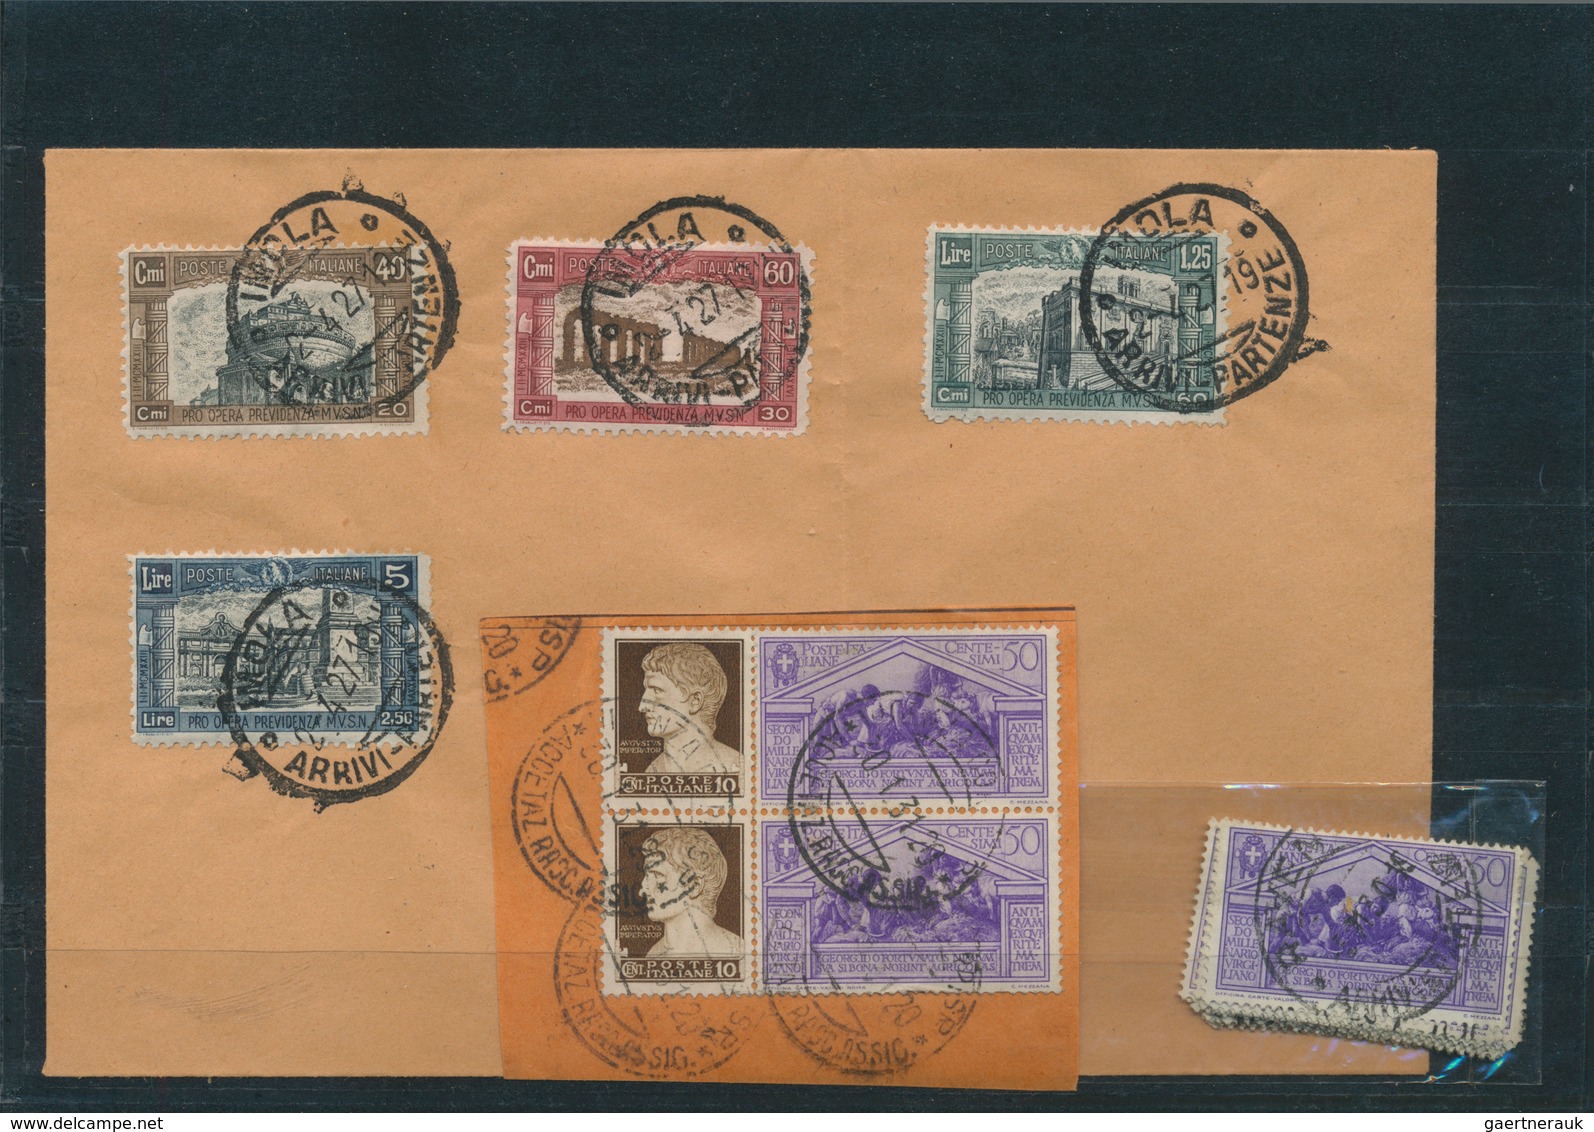 26984 Italien: 1925/1960 (ca.),small Box Containing A Loose Accumulation Of Commemorative Issues In Good D - Marcophilie